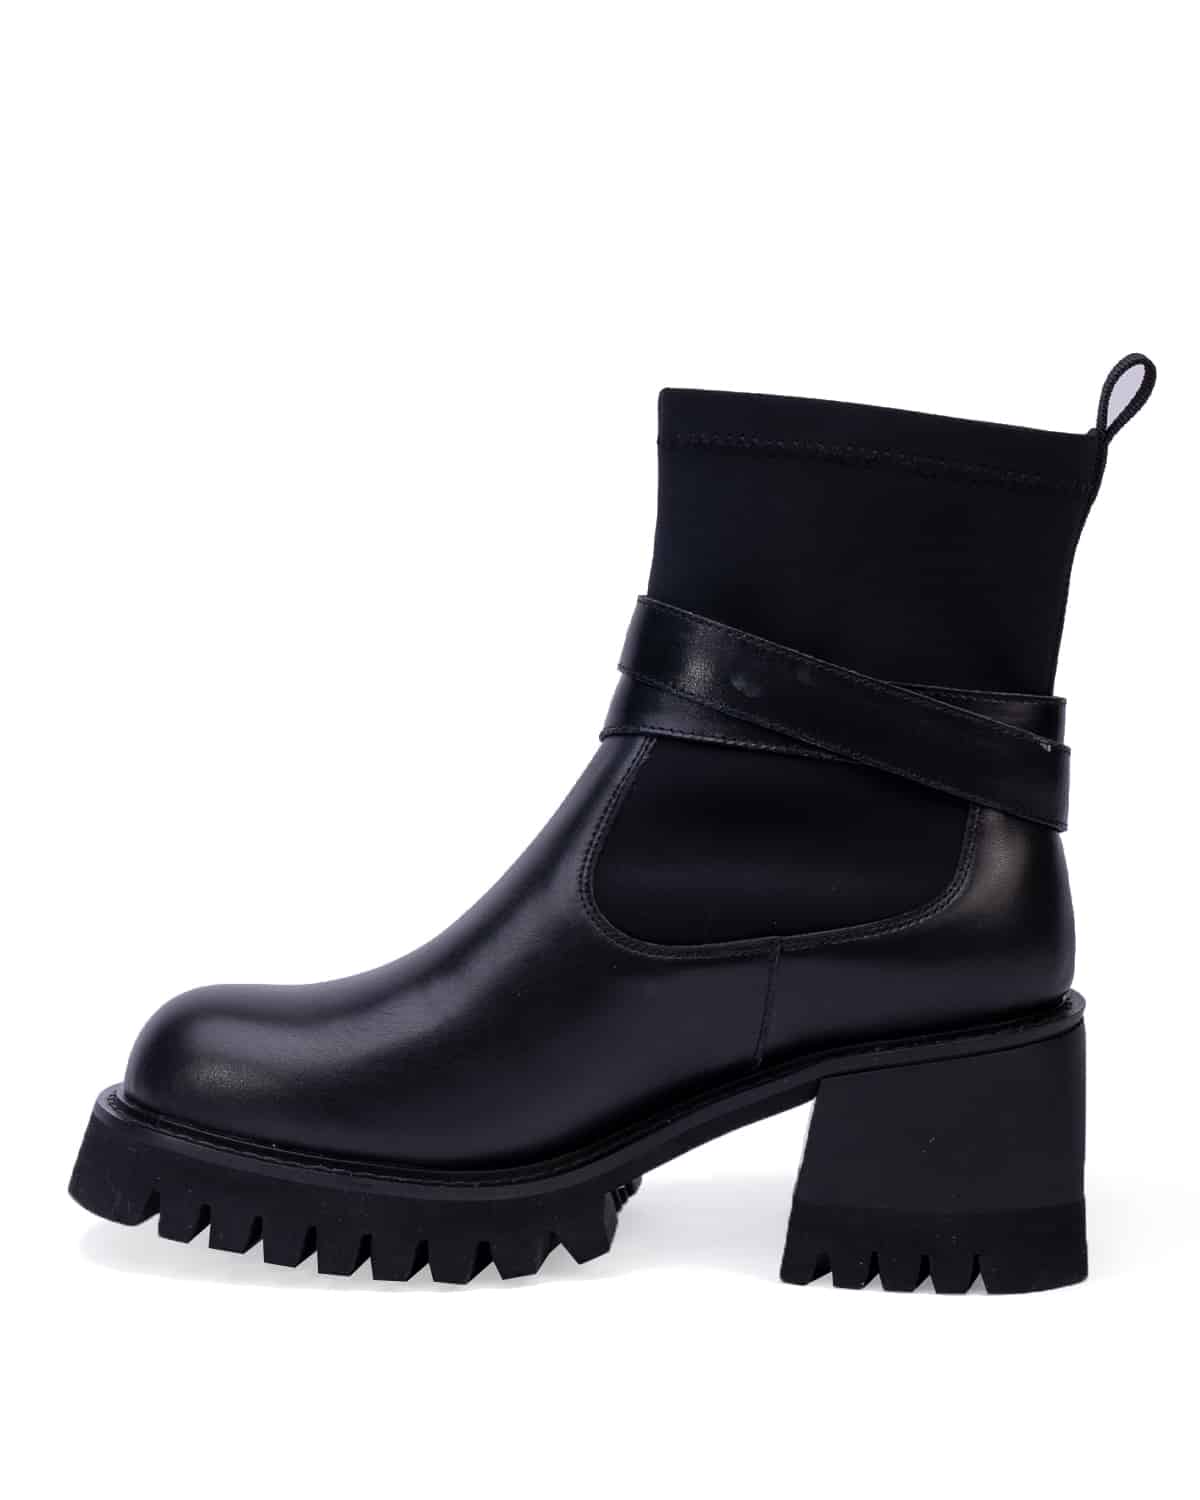 Ankle boots - Anna shoes & more